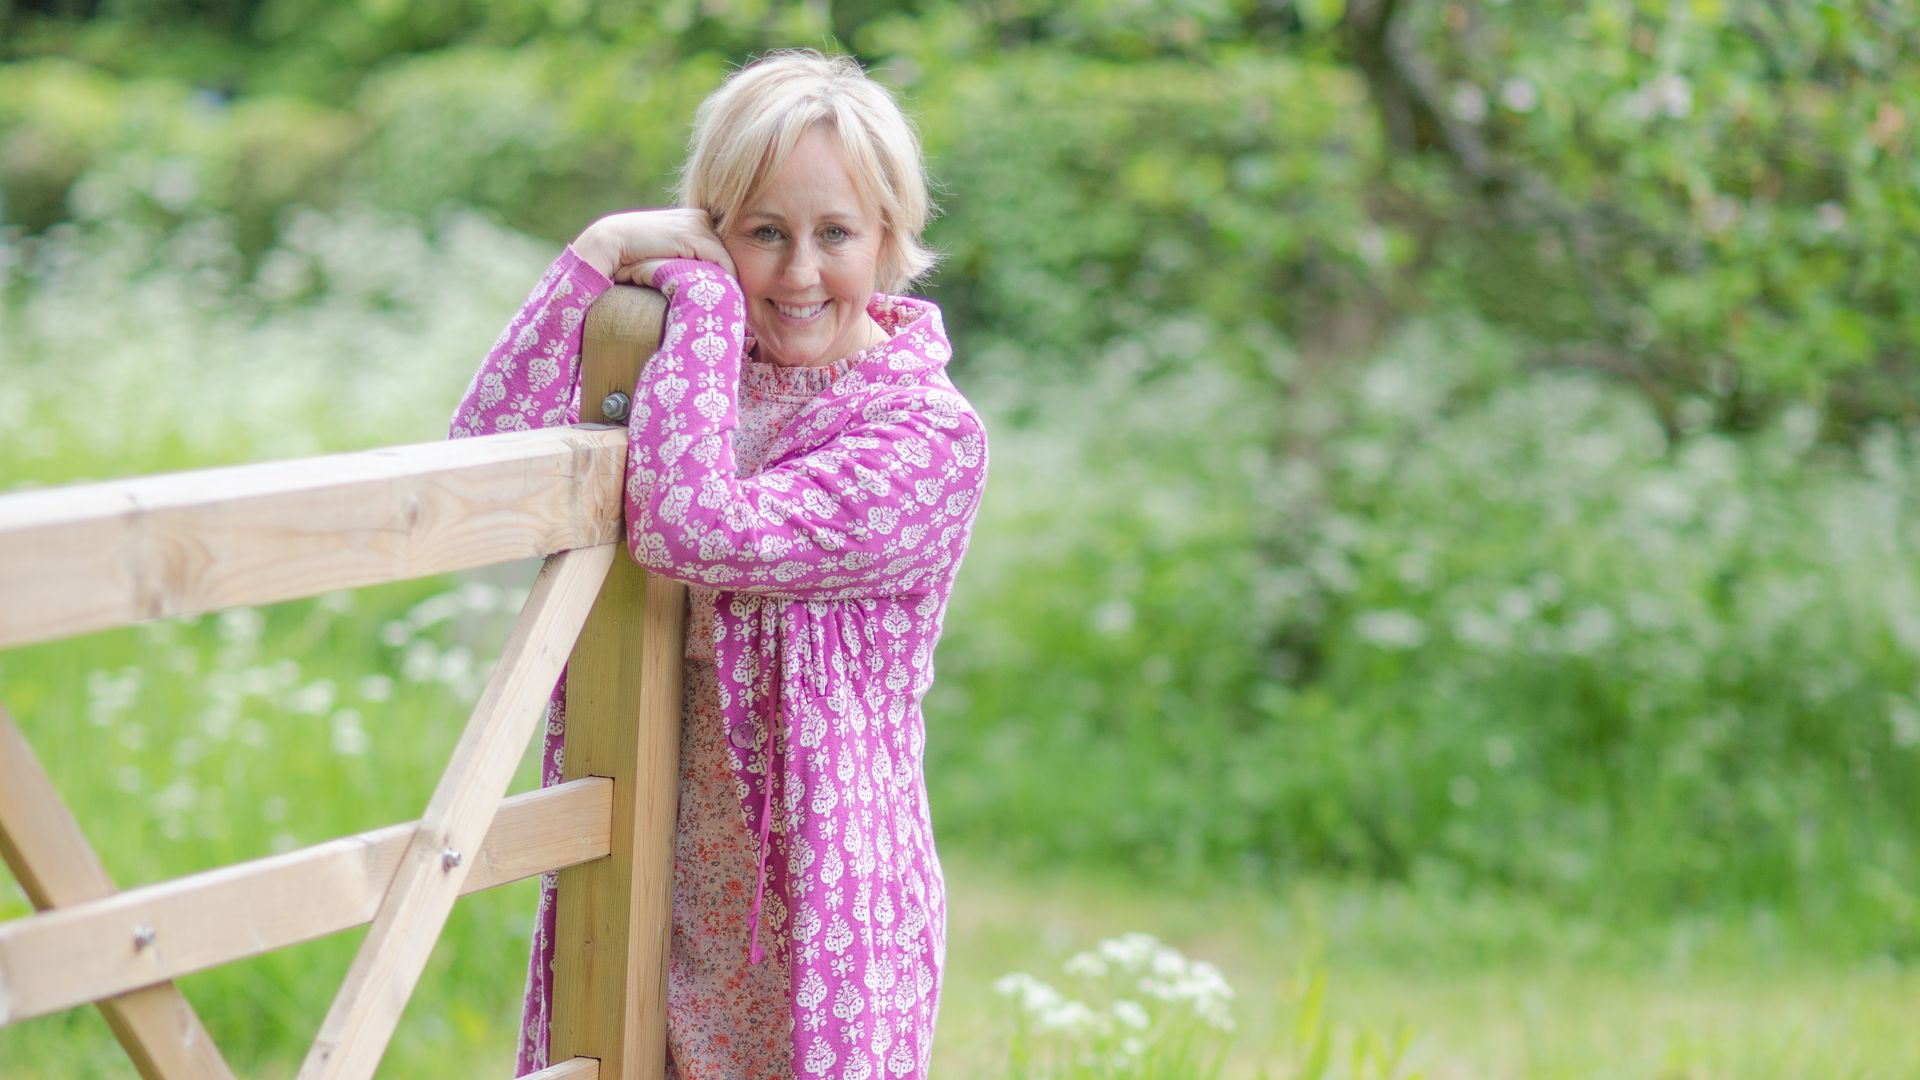 Shirlie Kemp looks pretty in pink while holding the garden gate